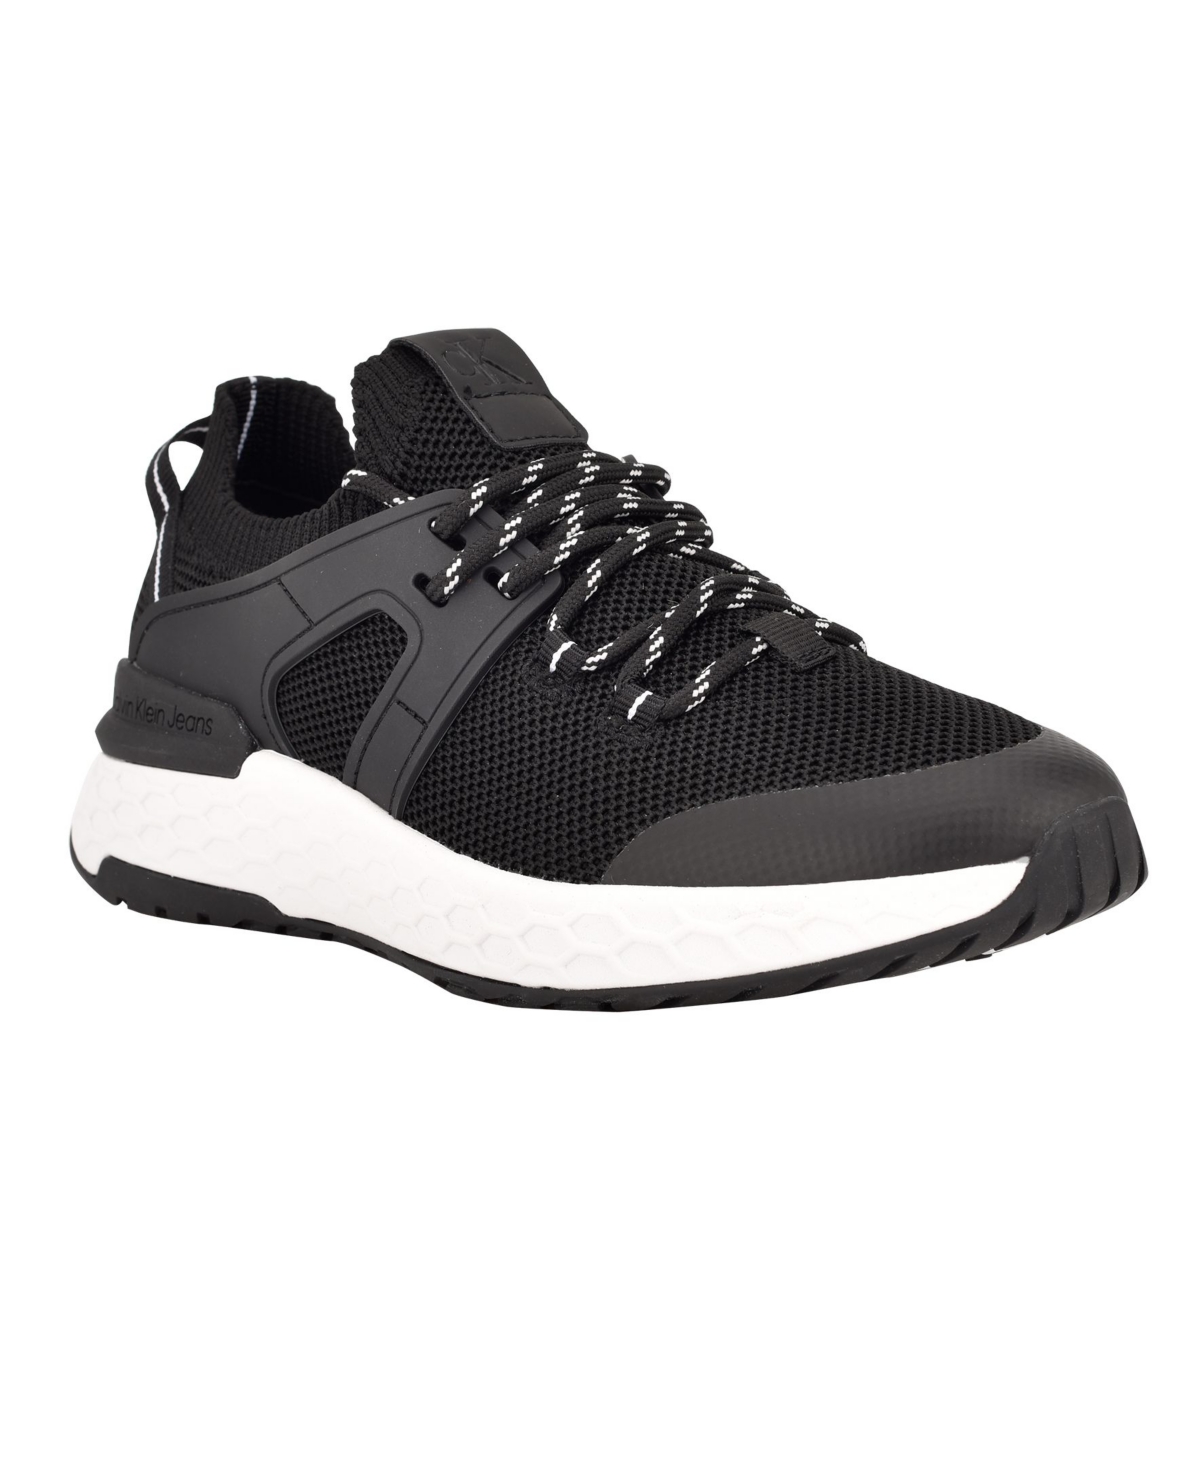 UPC 195972002333 product image for Calvin Klein Women's Aleah Lace-Up Sneakers Women's Shoes | upcitemdb.com